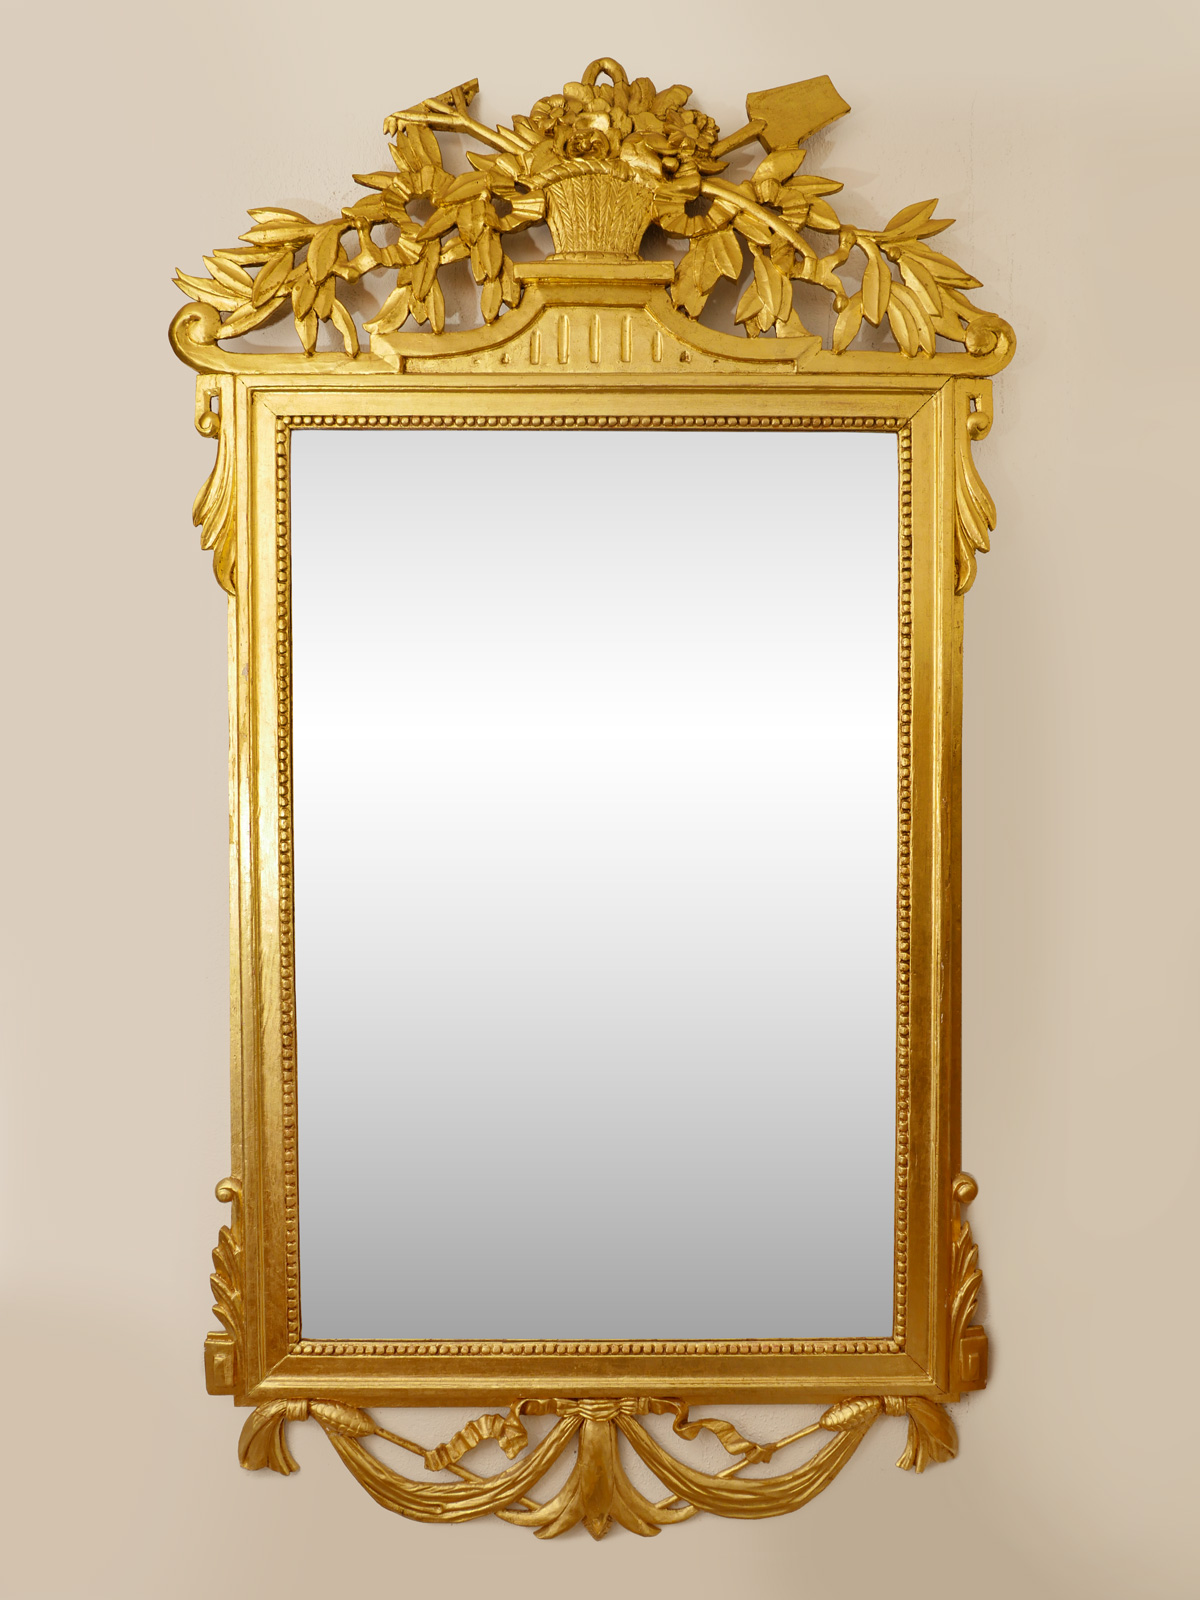 LOUIS XVI STYLE CARVED AND GILT 36d337